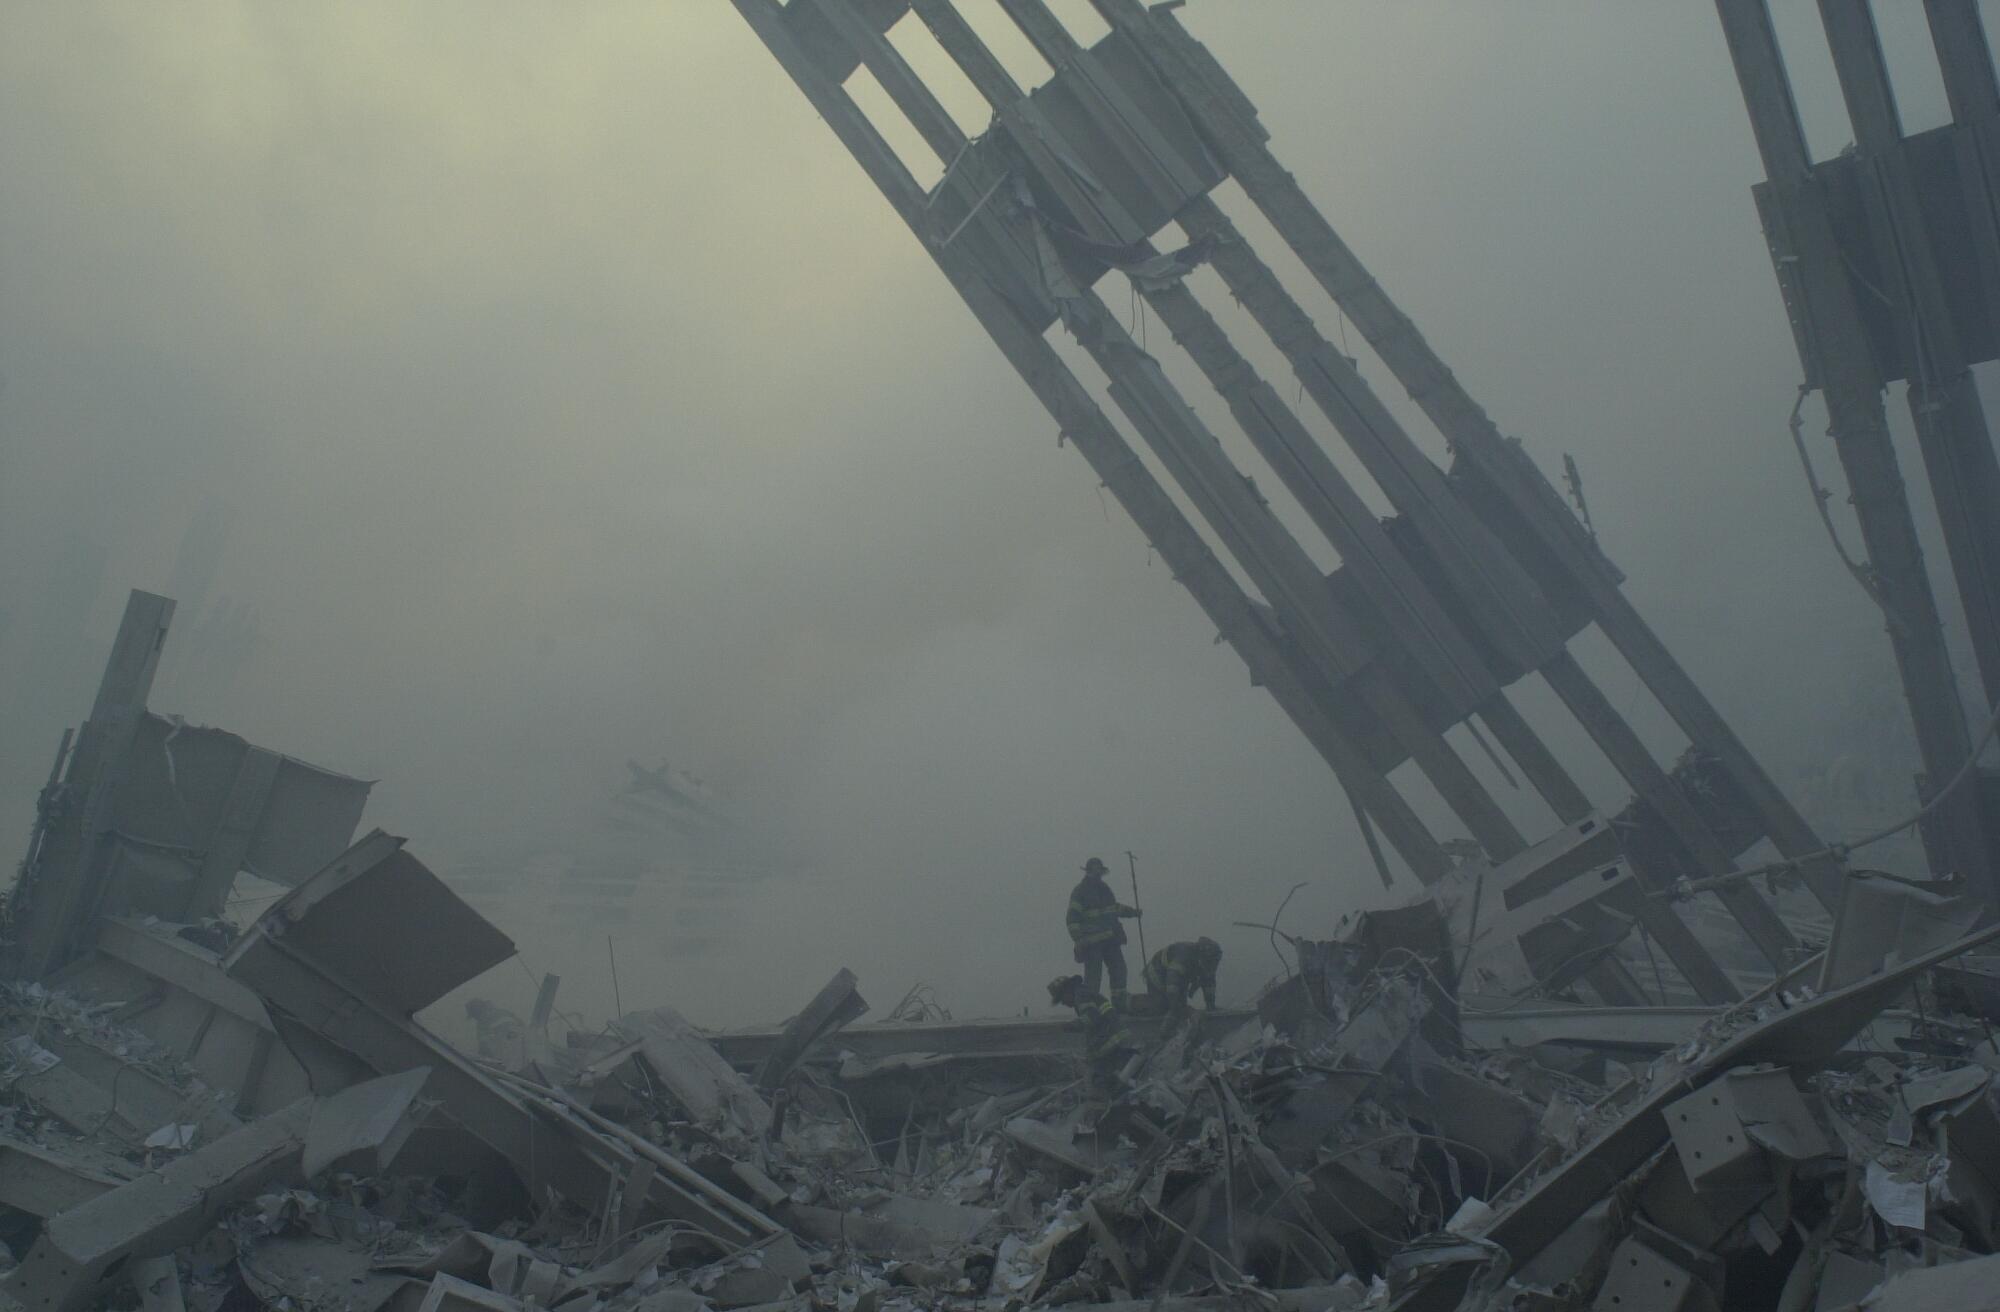 Firefighters are dwarfed by debris at the World Trade Center site